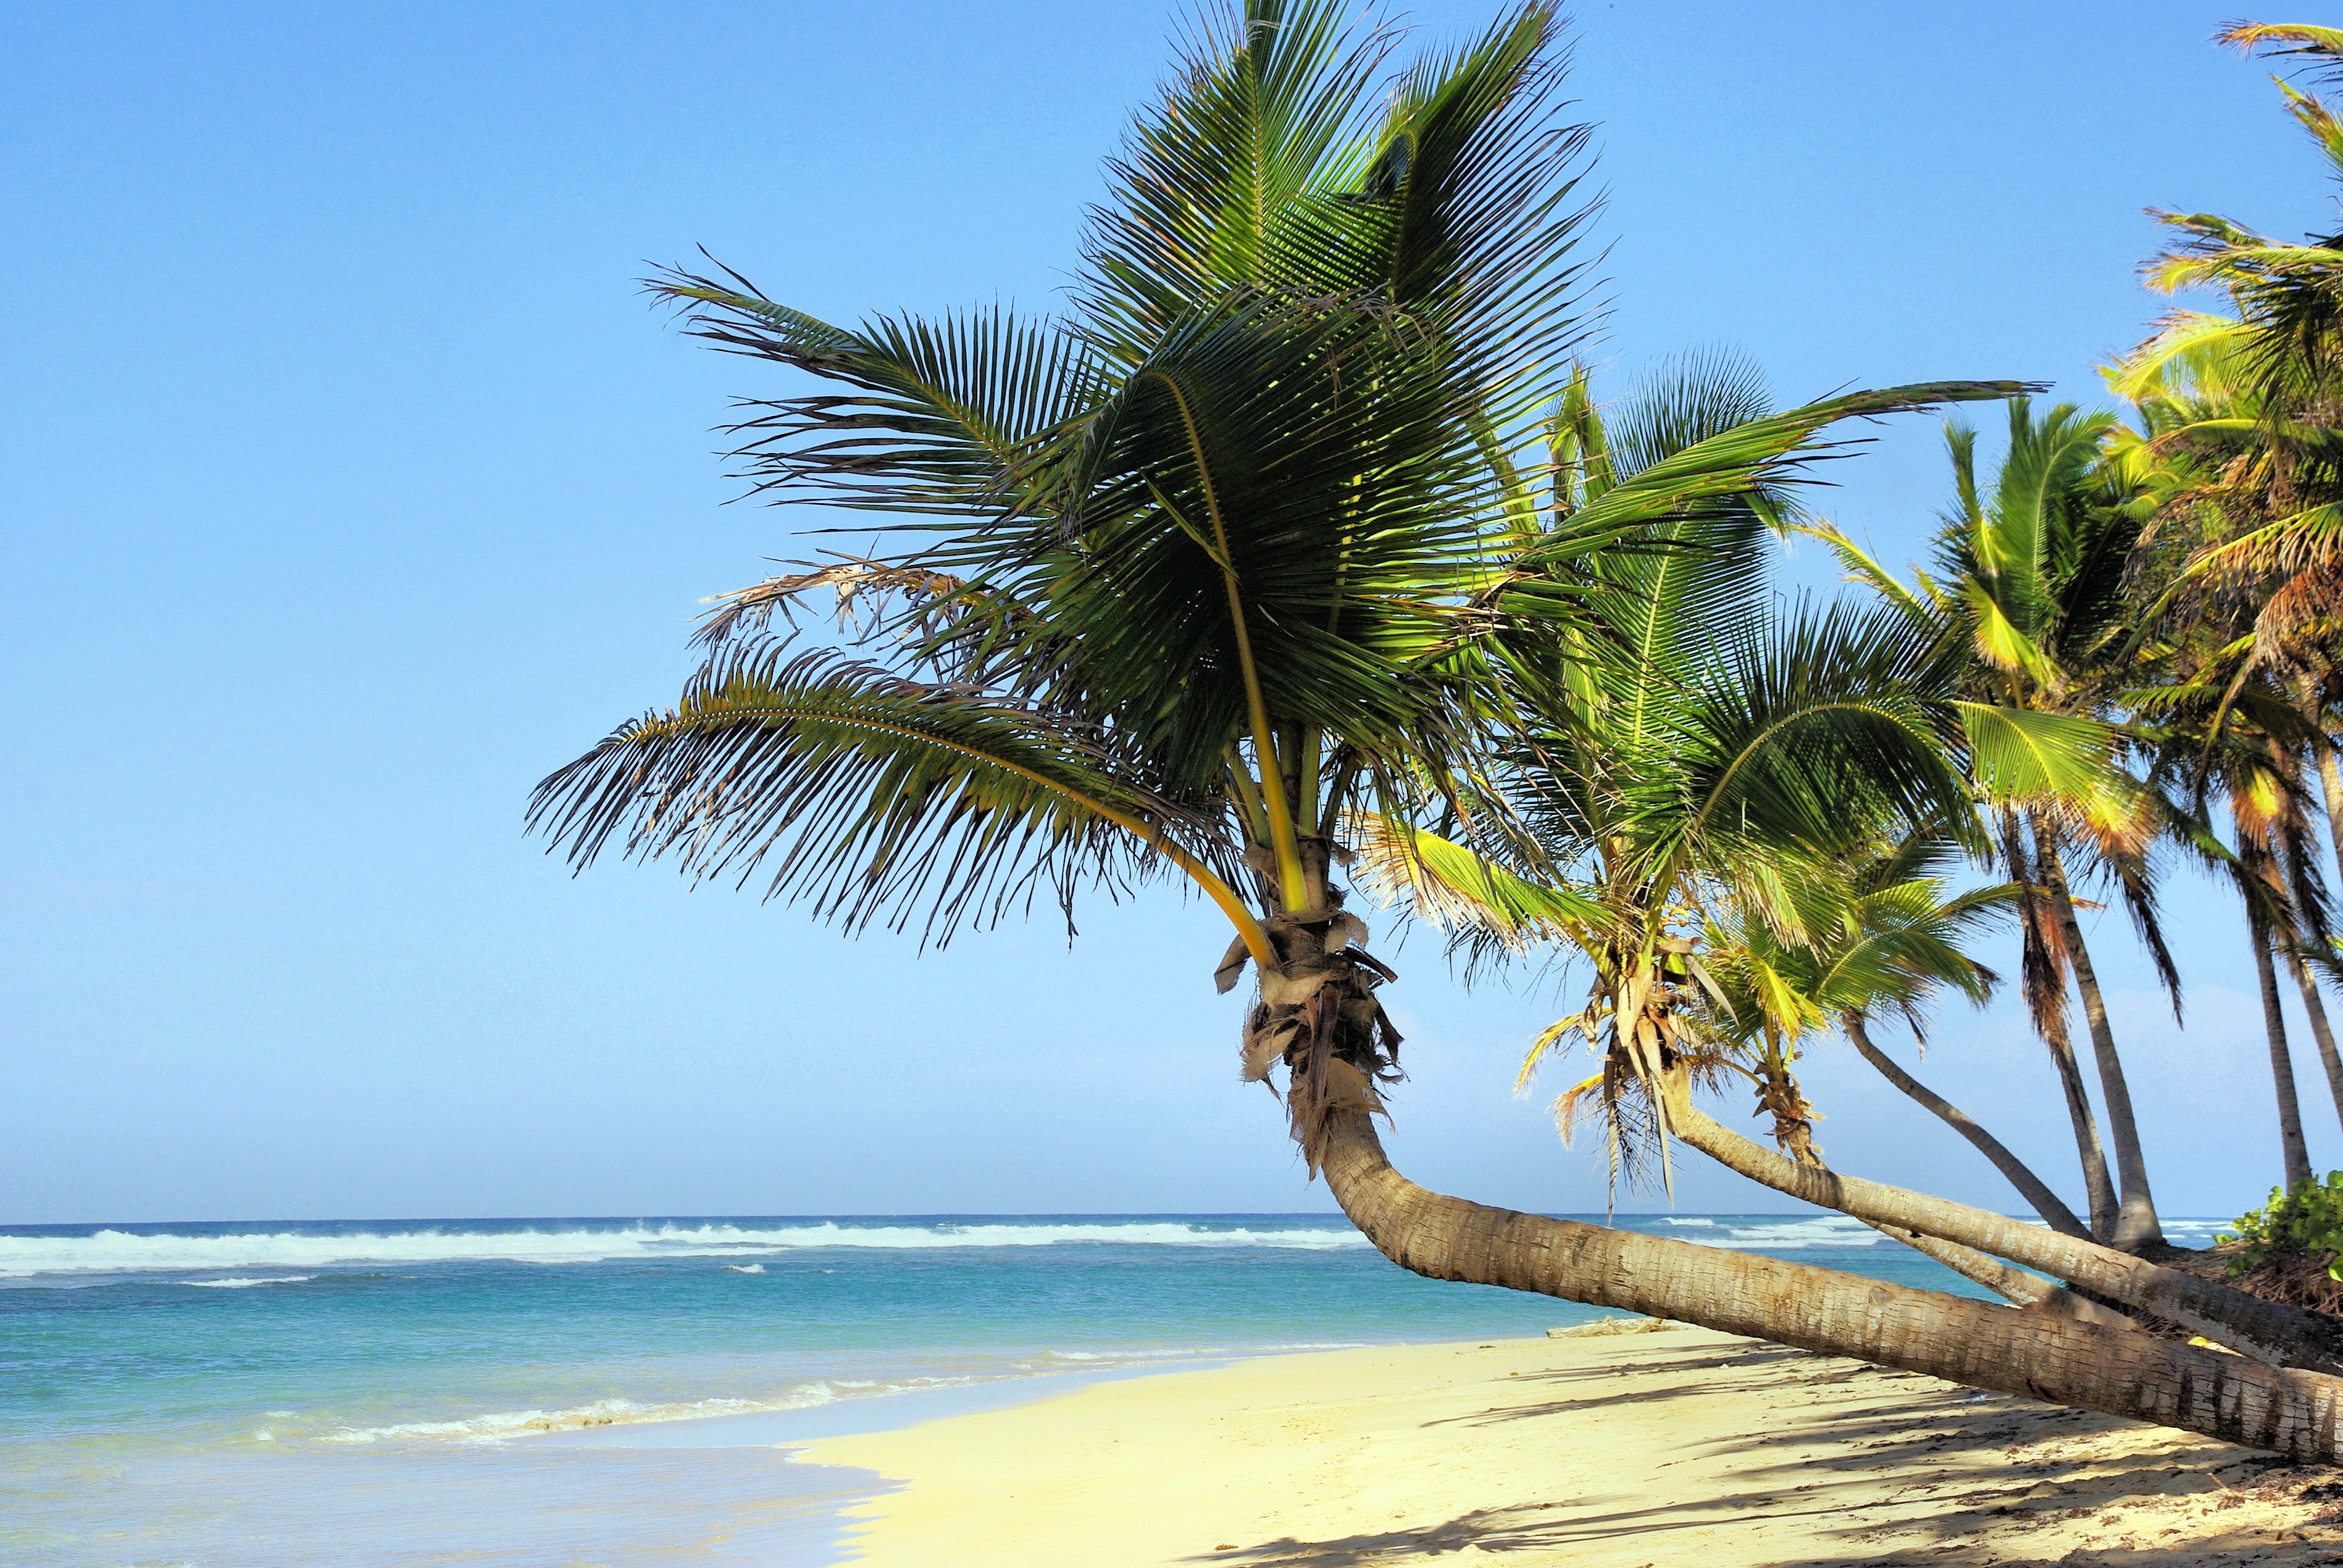 Palm Trees on the Beach in Cuba image - Free stock photo - Public ...